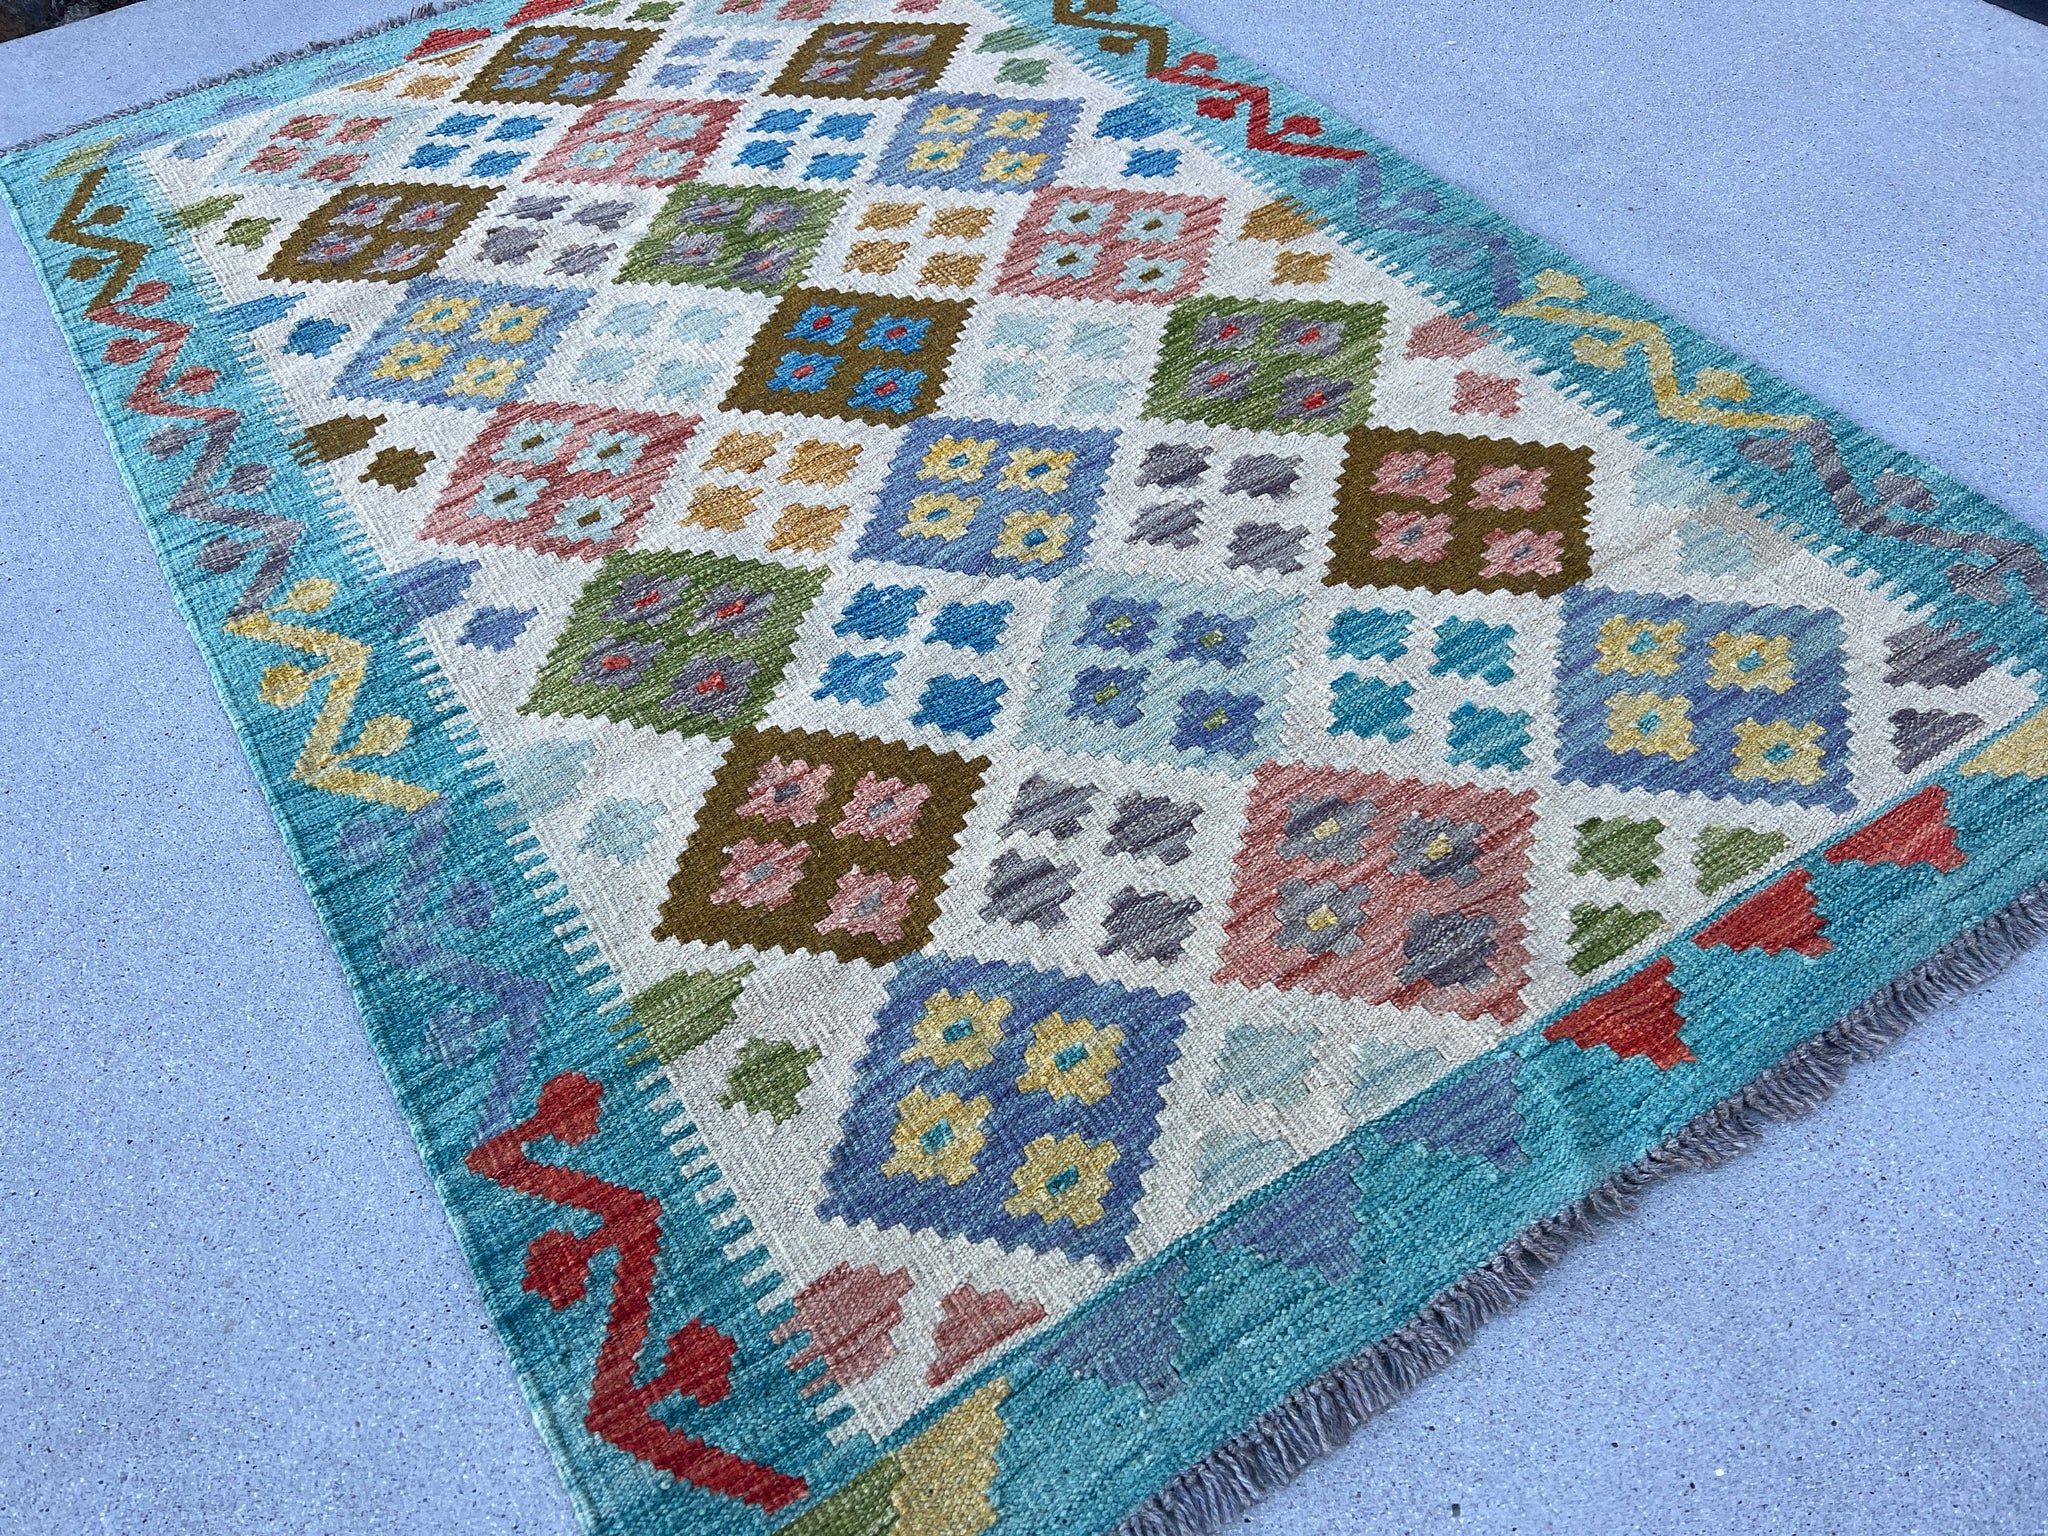 3x5 (100x180) Handmade Afghan Kilim Rug | Turquoise Olive Green Sky Blue Cream Beige Lime Green Grey Salmon Pink Taupe | Hand Knotted Wool